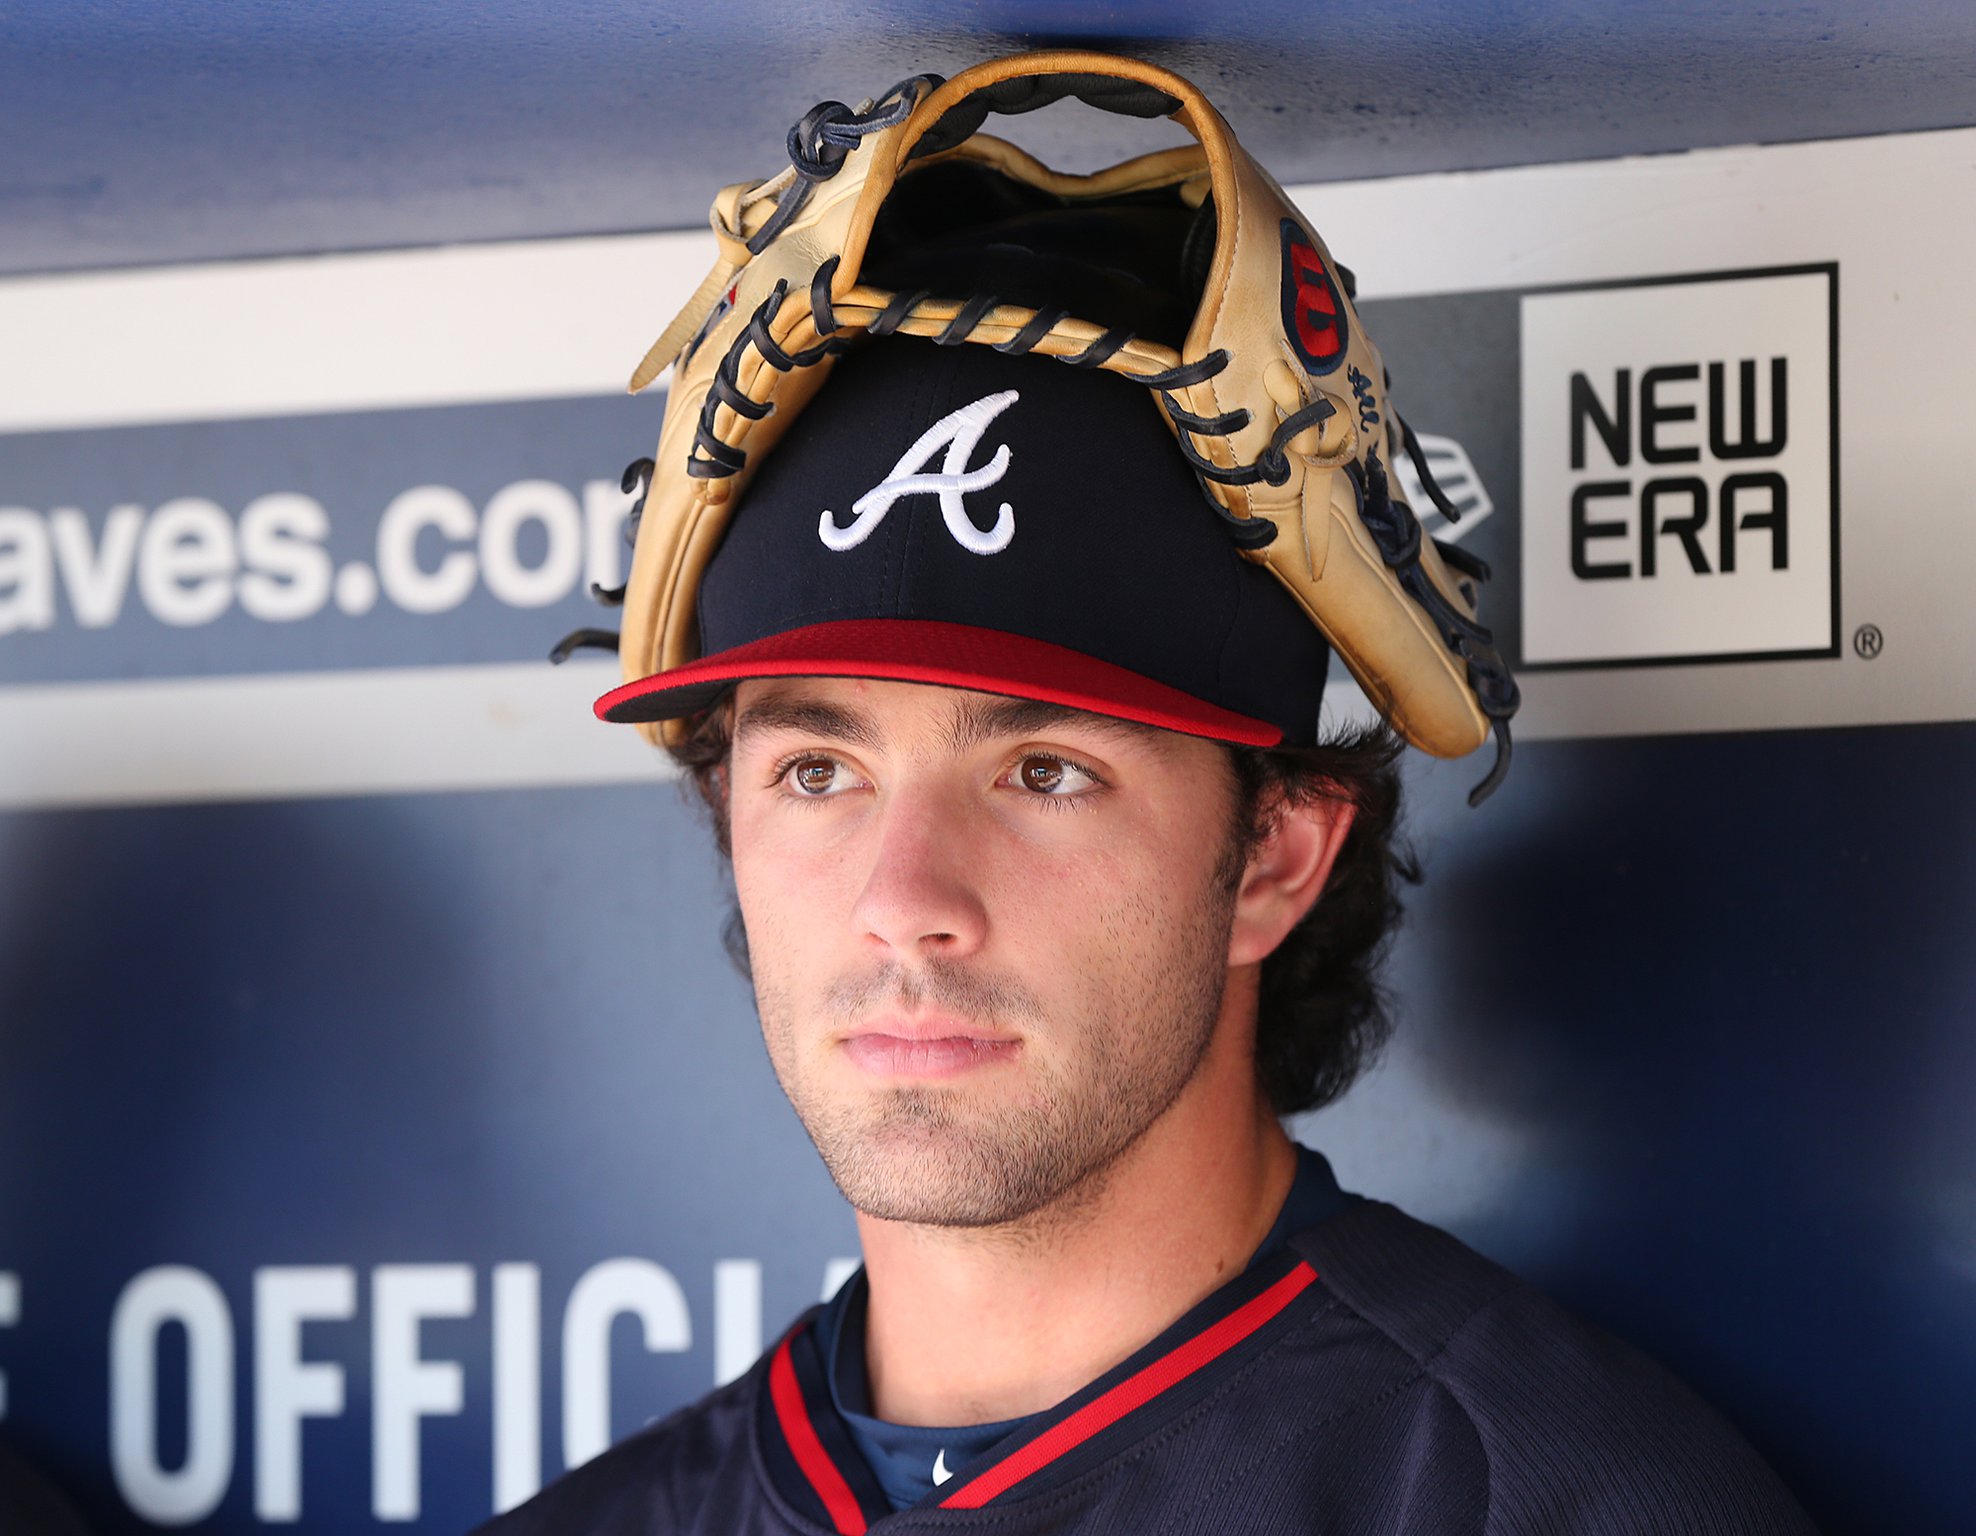 Atlanta Braves: Dansby Swanson comes home amid world of support